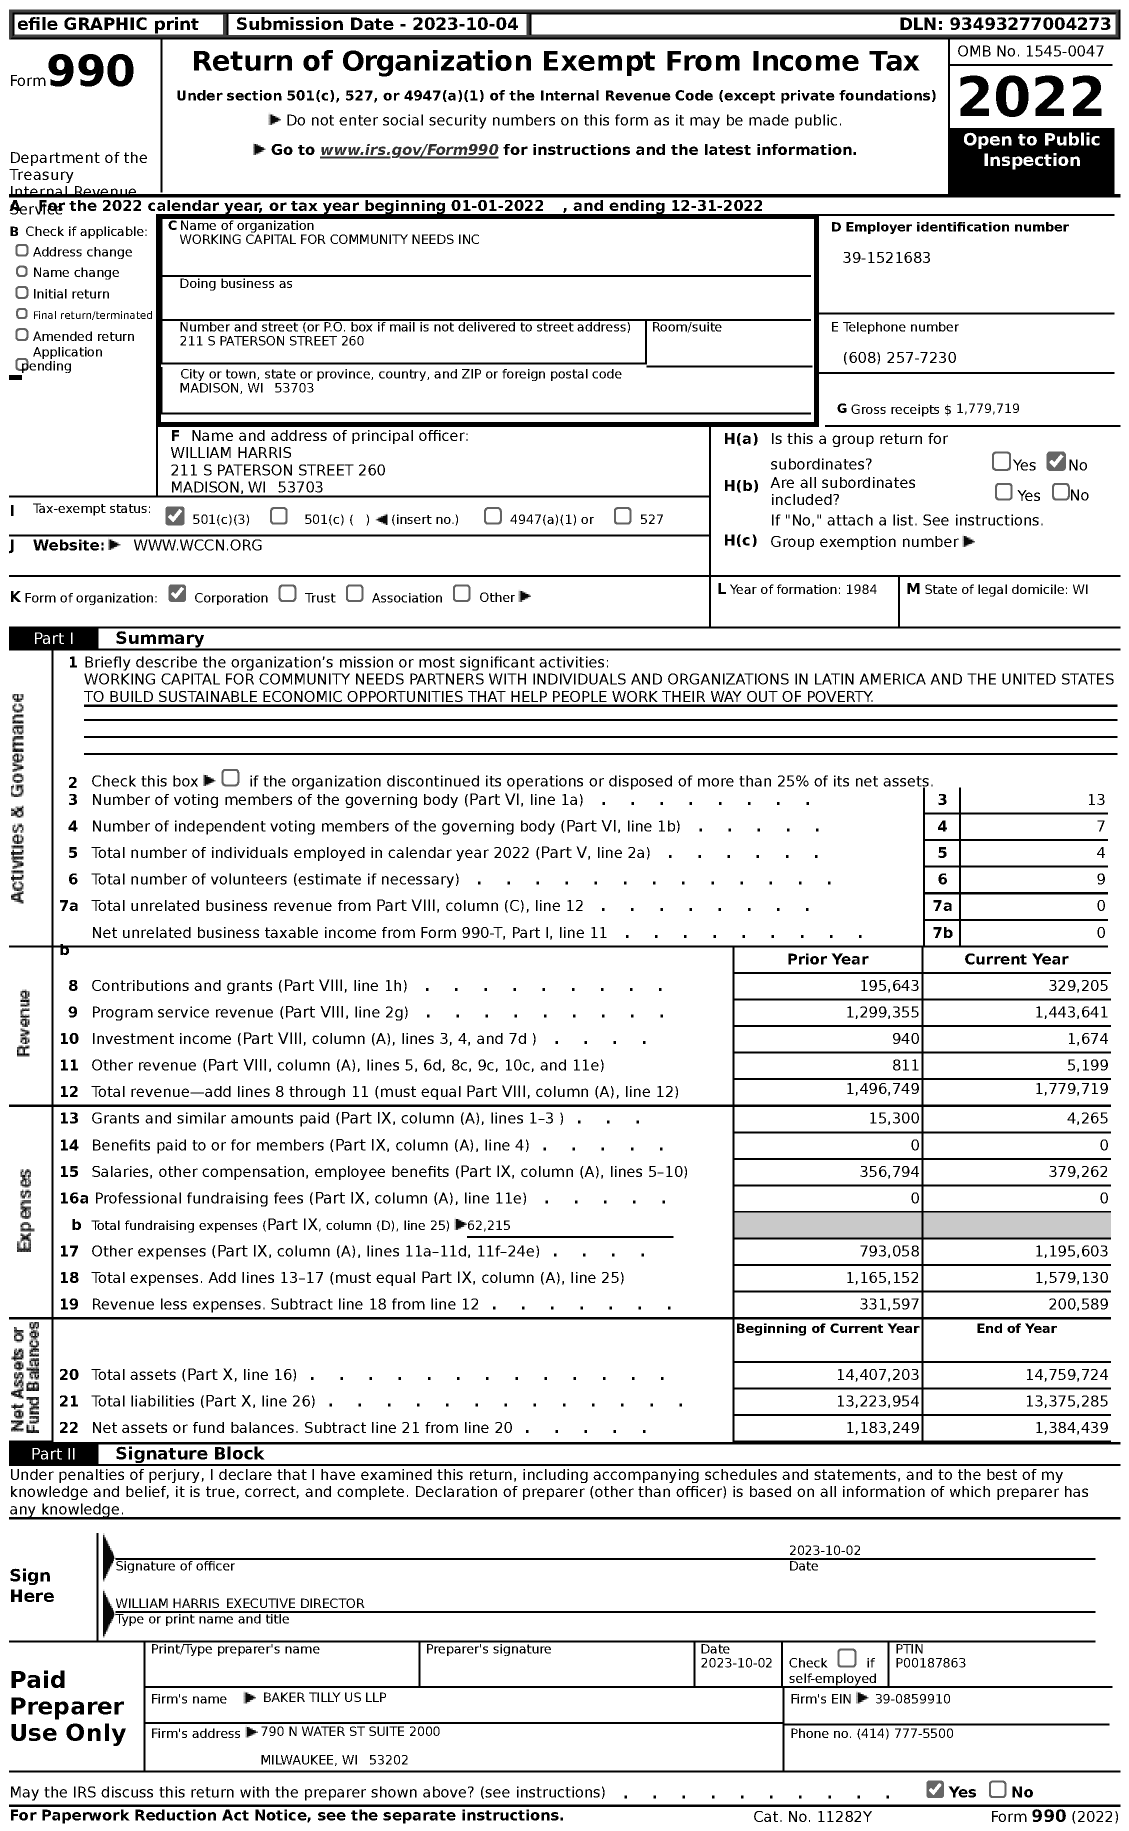 Image of first page of 2022 Form 990 for Working Capital for Community Needs (WCCN)